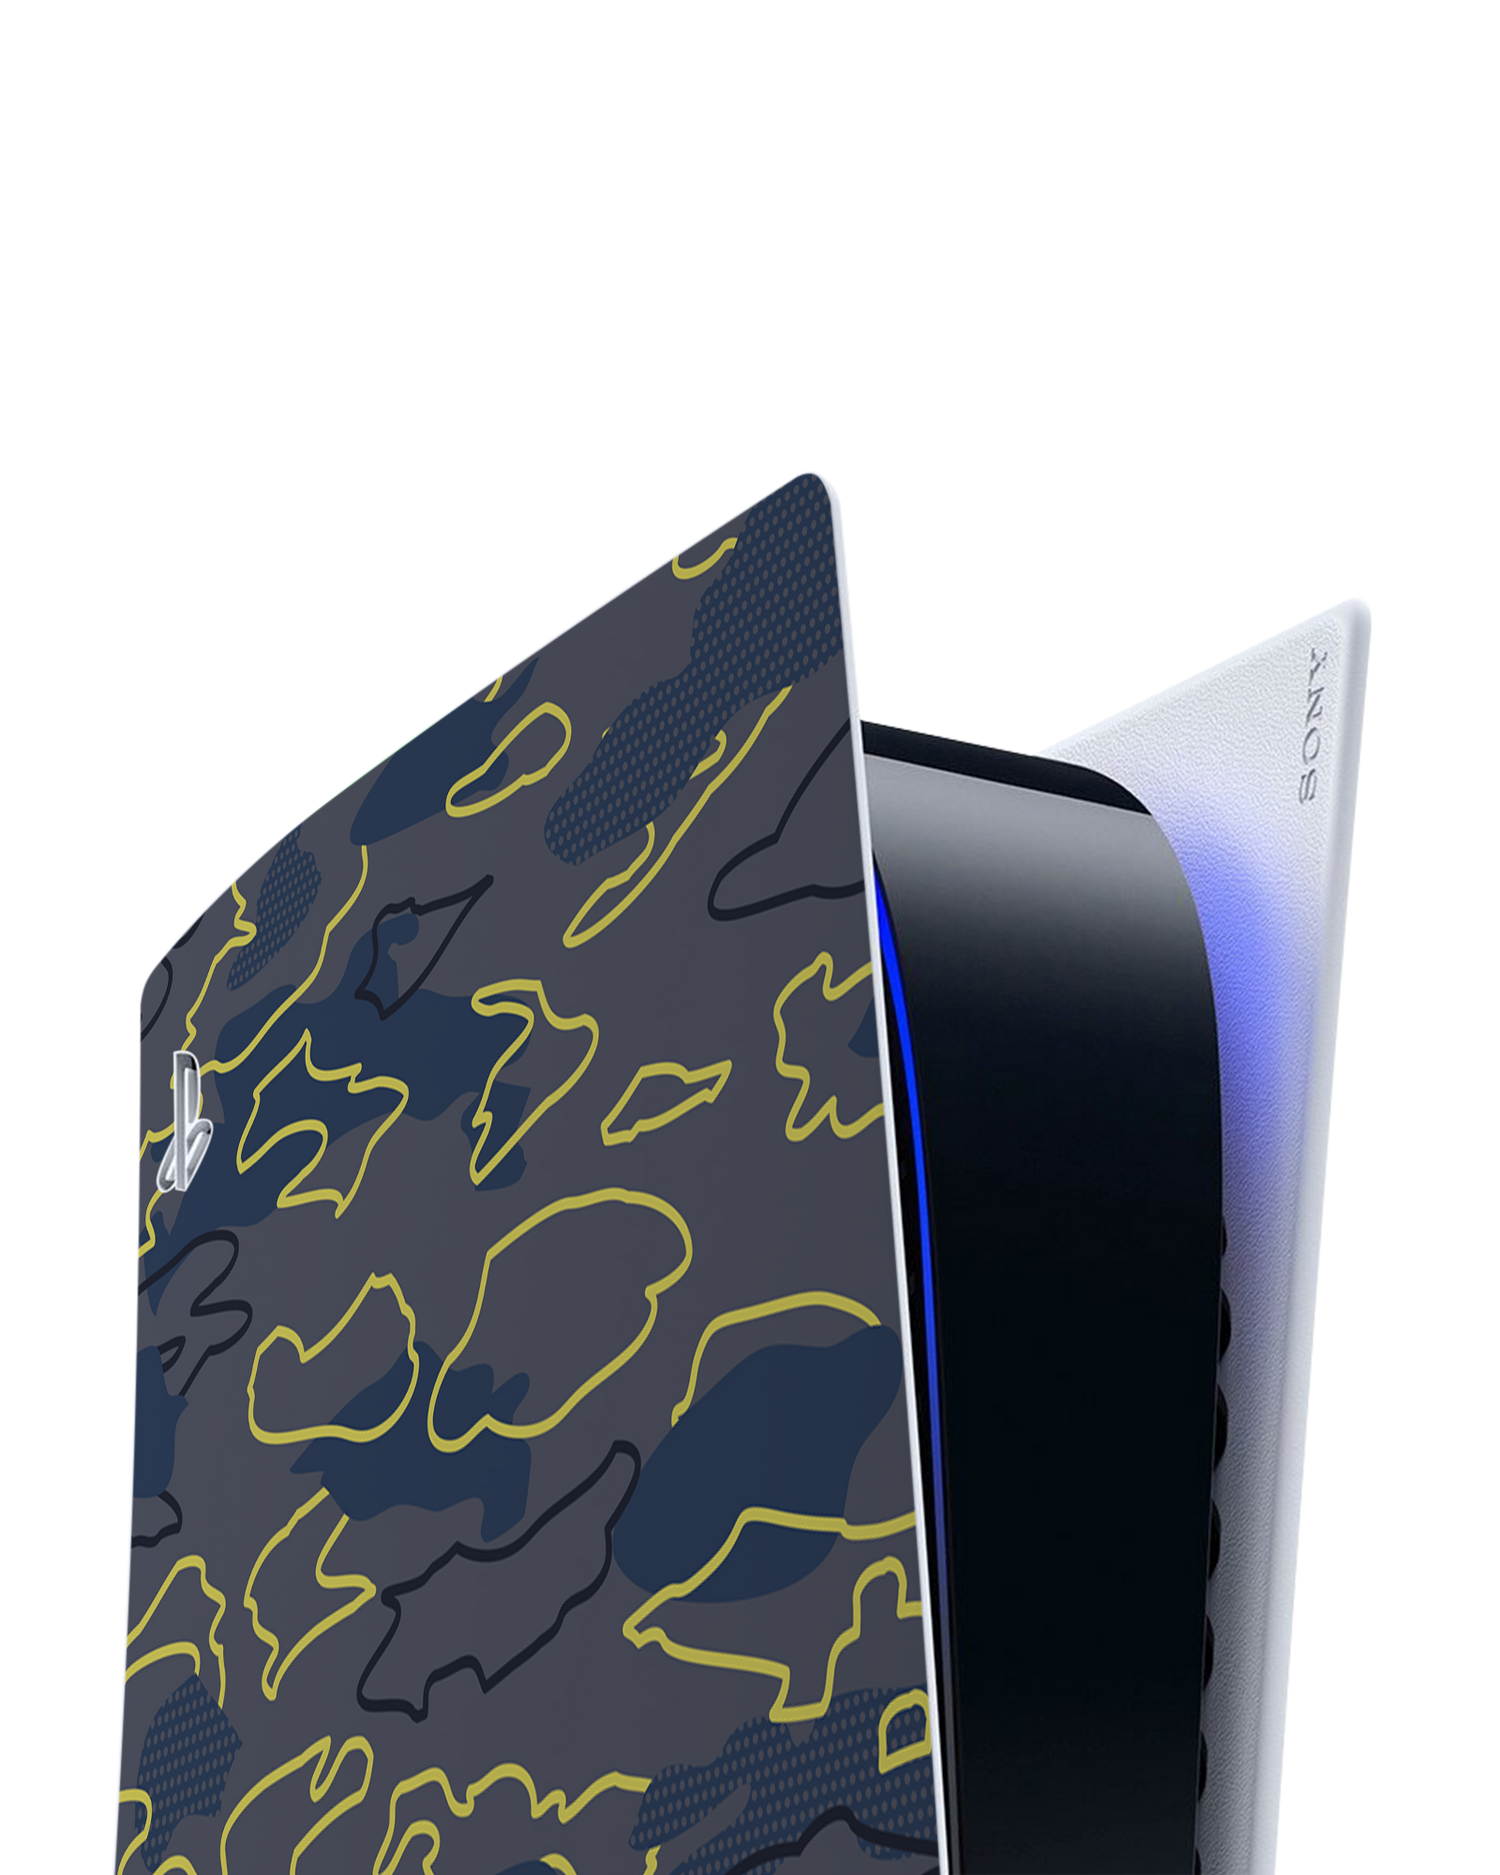 Linear Camo Console Skin for Sony PlayStation 5: Detail shot